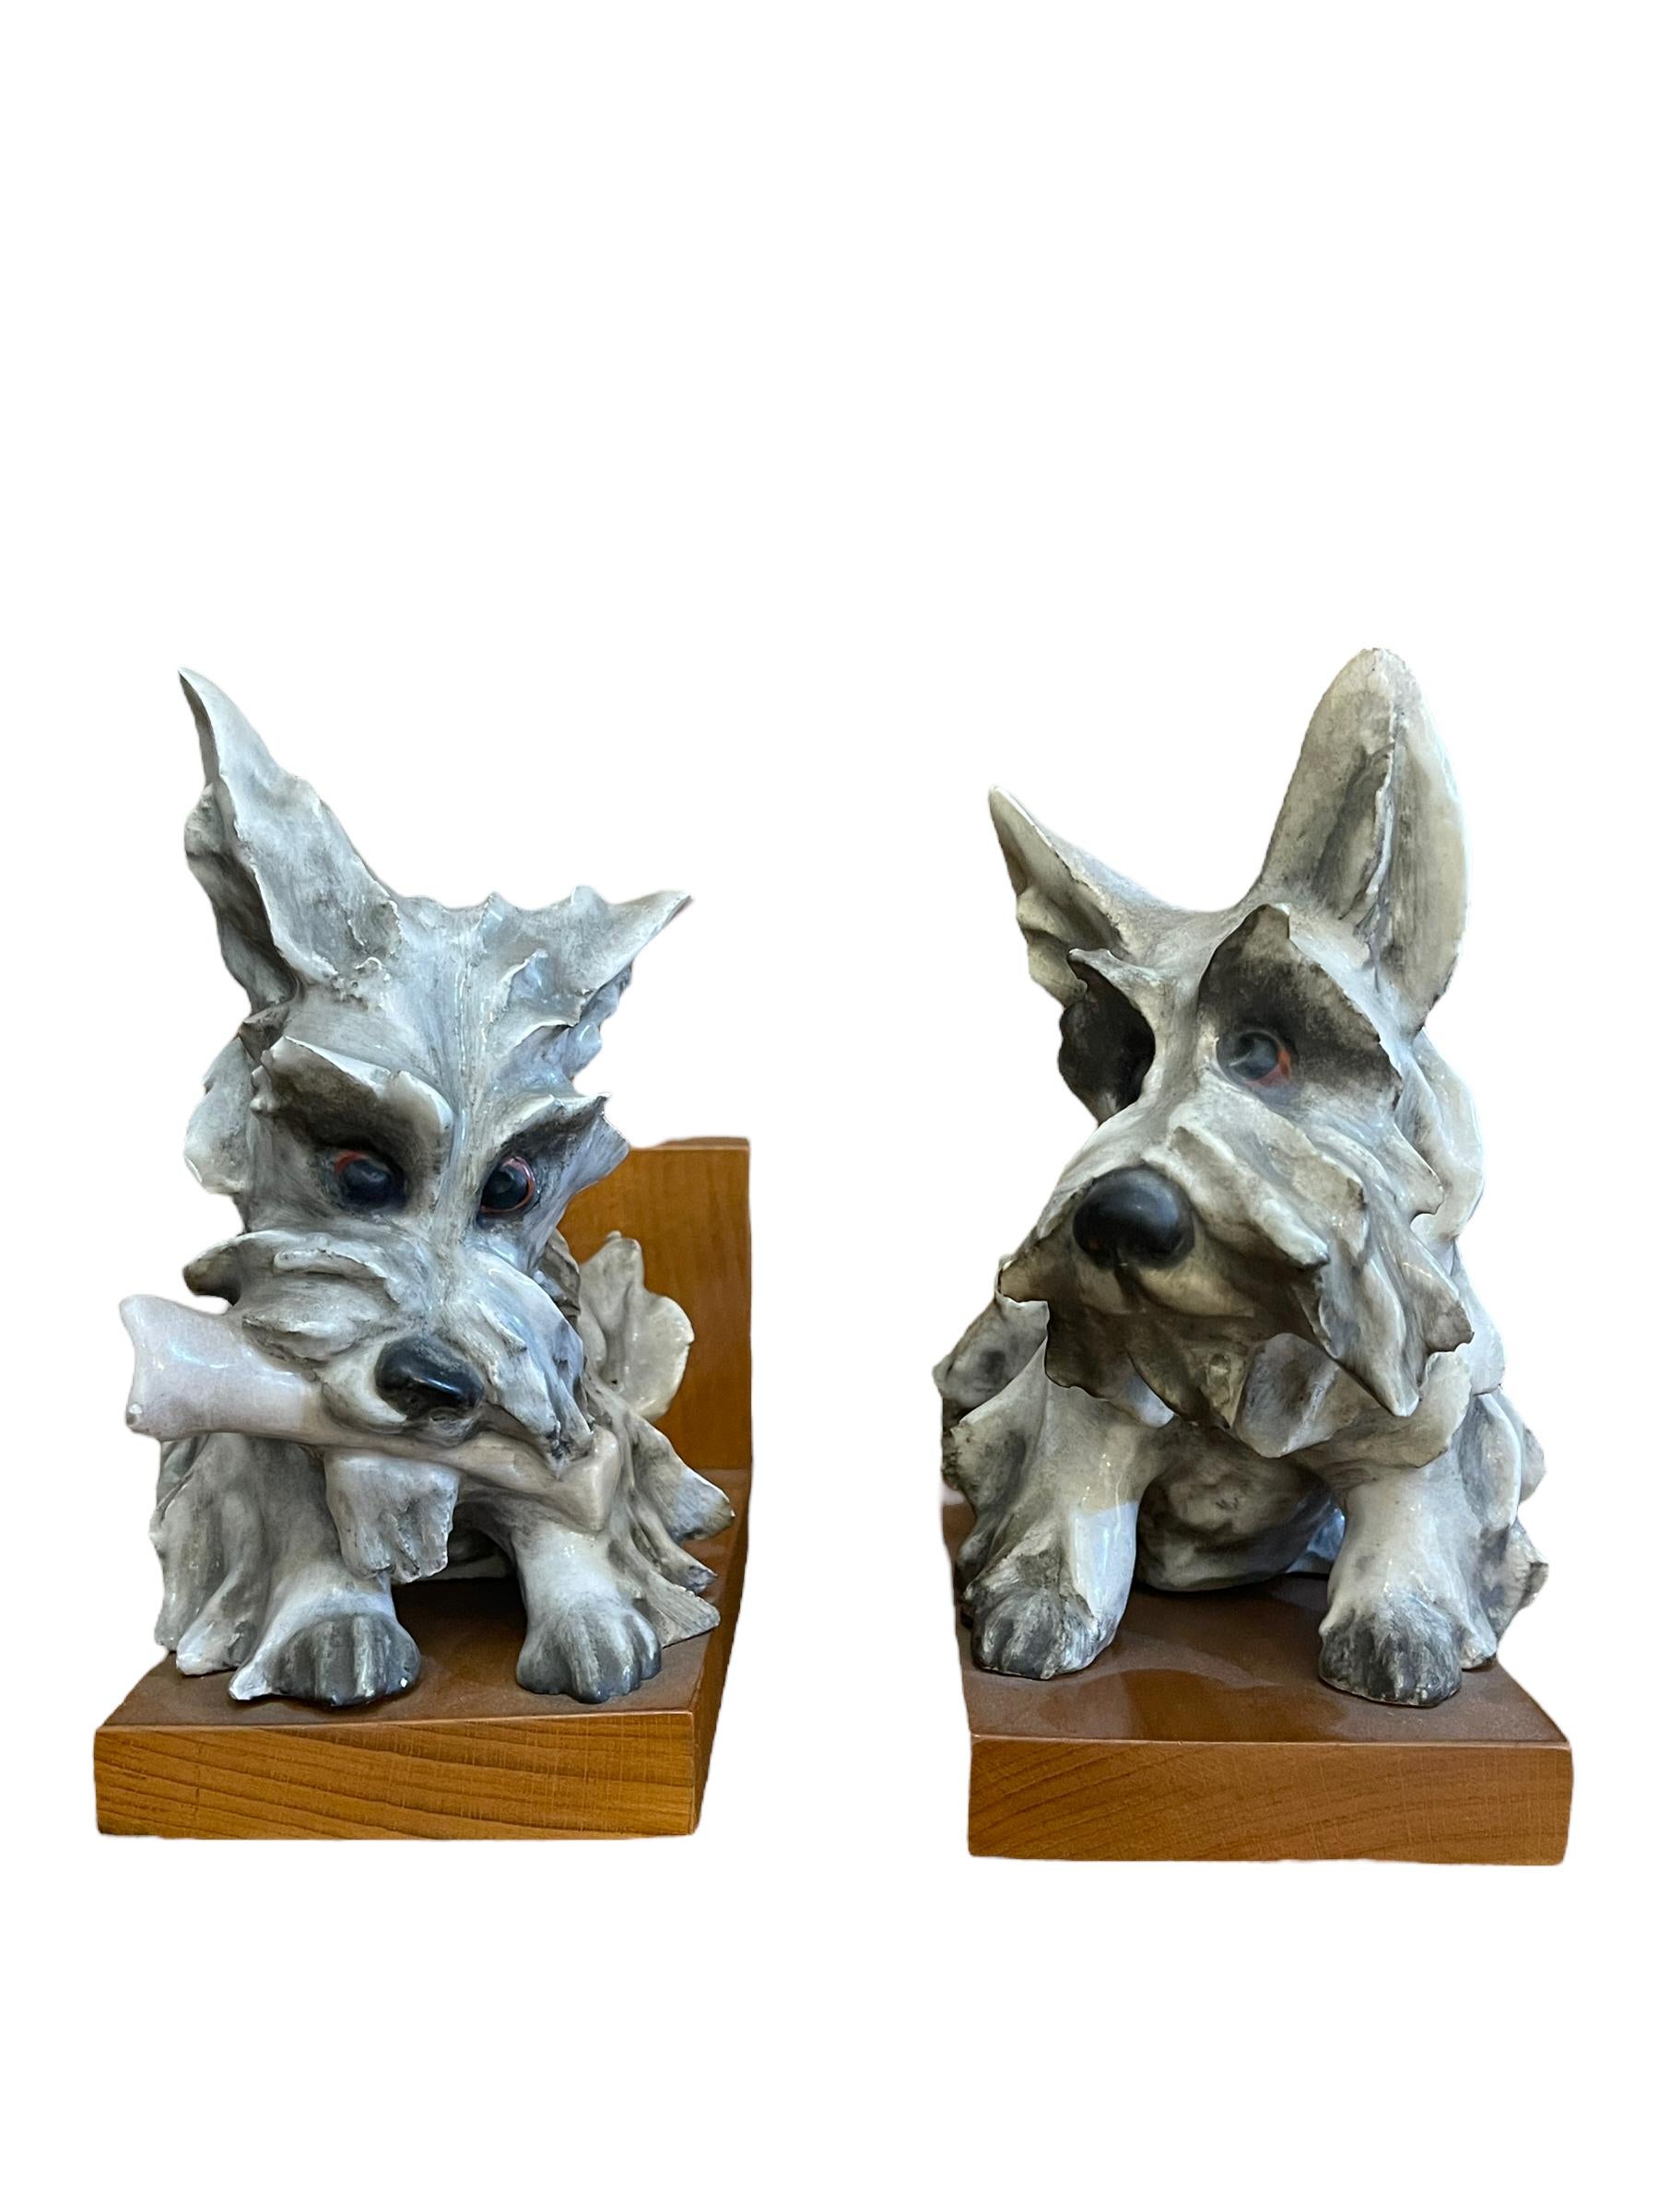 Pair of ceramic bookend dogs, Cacciapuoti, 20th century
Collectibles, pair of ceramic dogs, made and signed by Cacciapuoti, signature visible on the back, as shown in the photo, mounted as bookends on wooden bases.
Dimensions of the sculptures only,